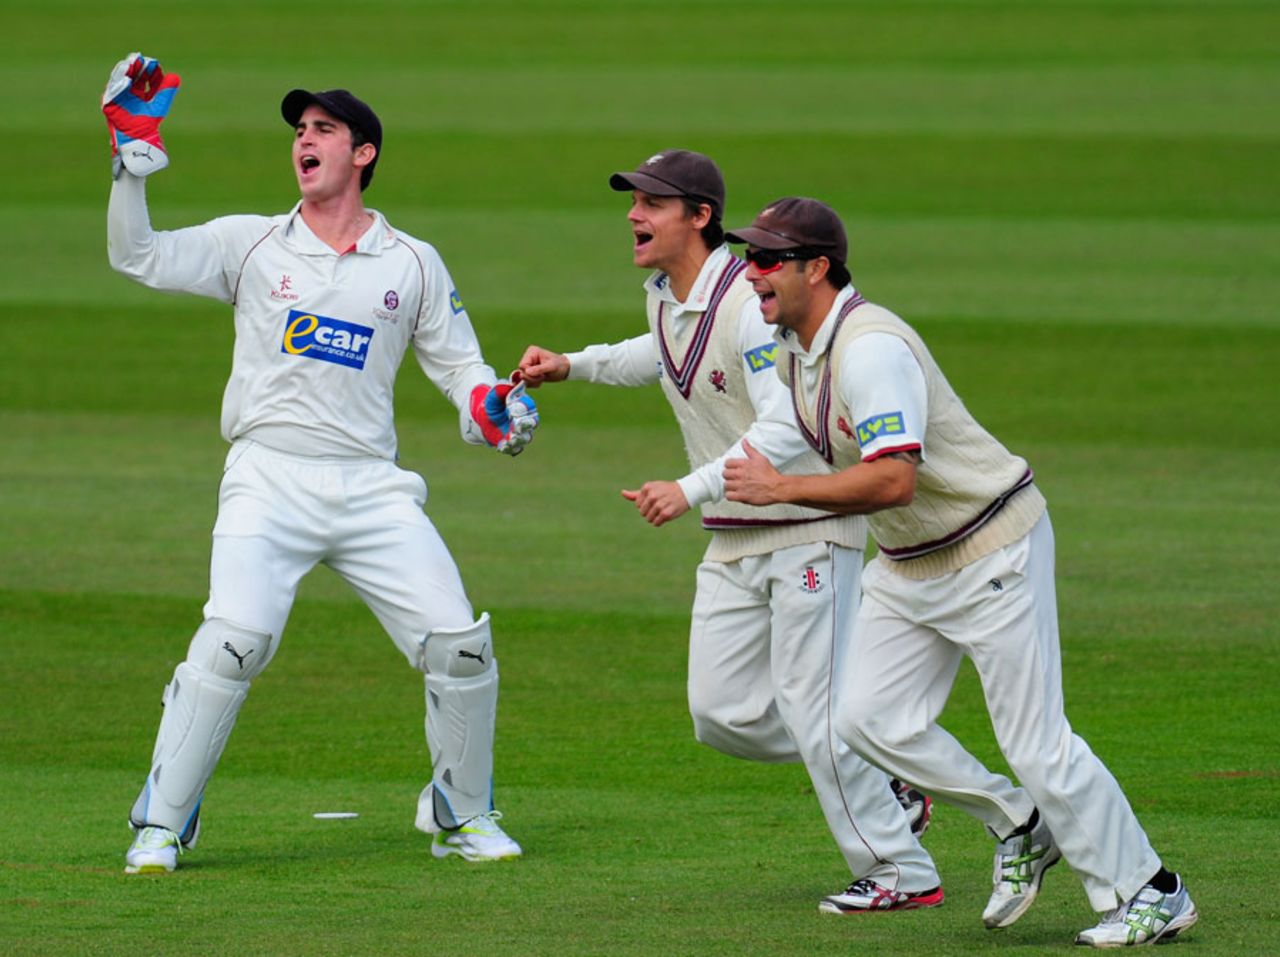 Craig Kieswetter celebrates after claiming a catch to dismiss Michael di Venuto, Durham v Somerset, County Championship, Division One, 1st day, Chester-le-Street, May 9, 2012